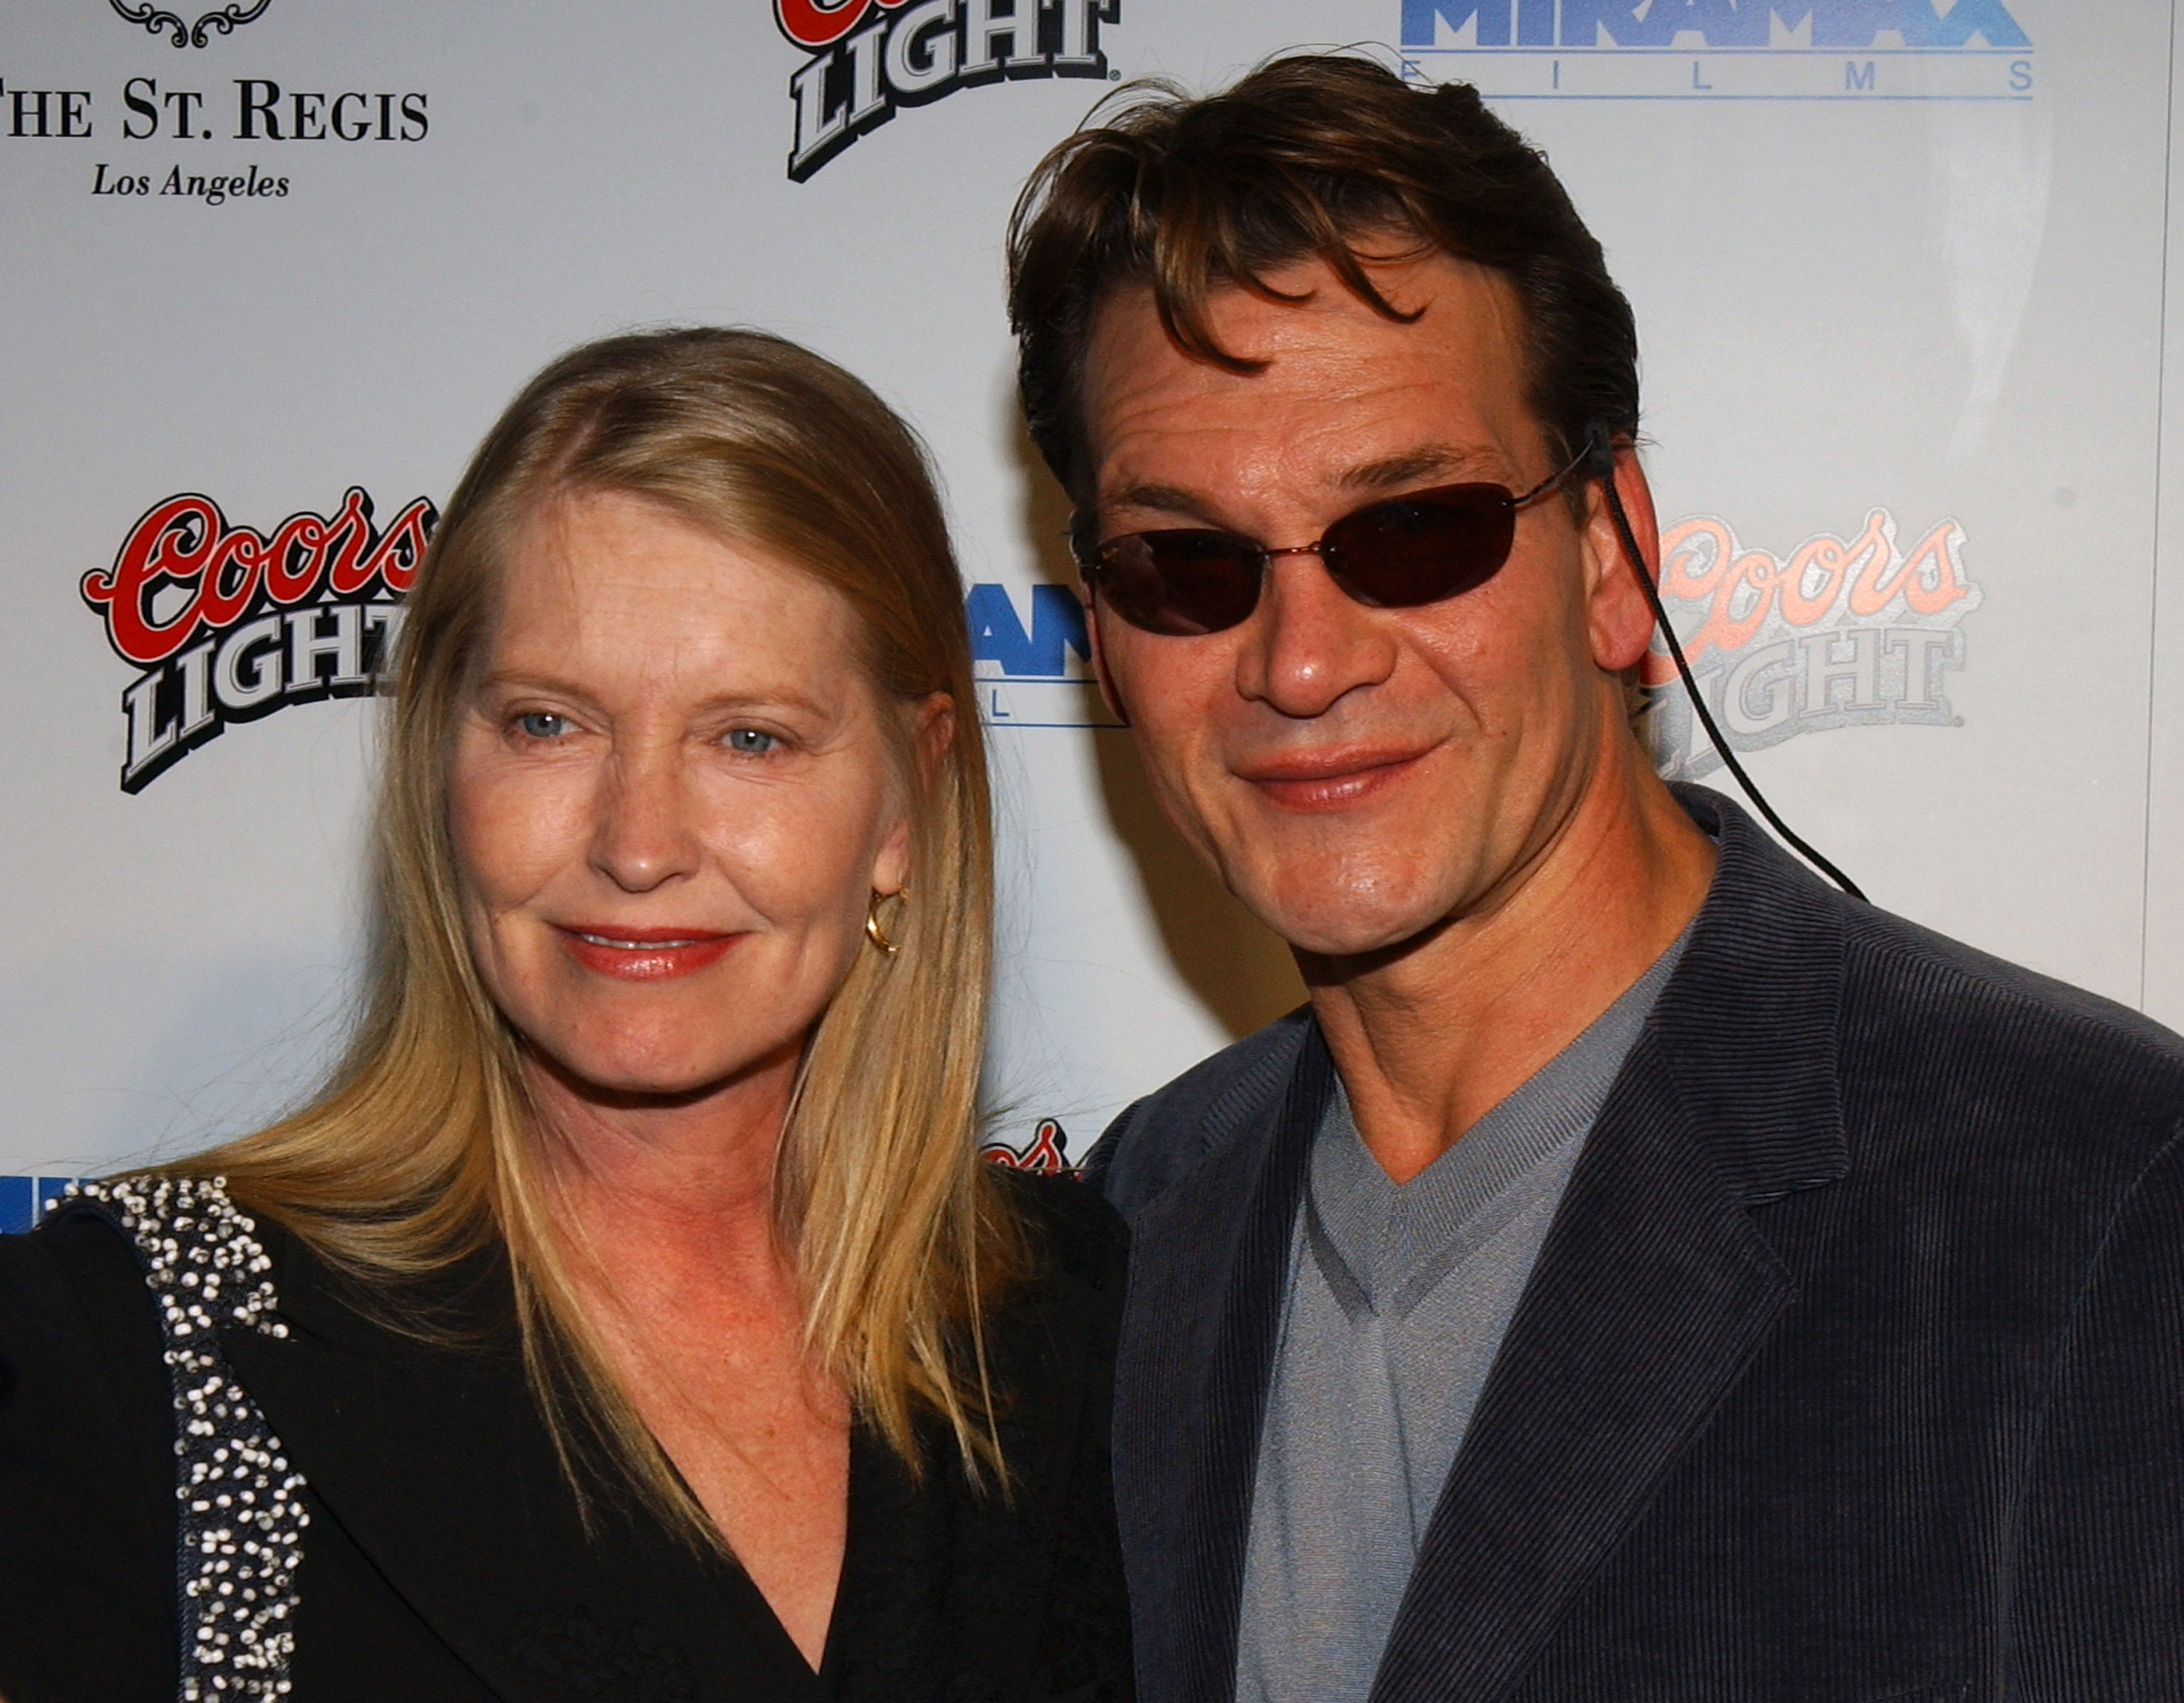 Patrick Swayze and Lisa Niemi in Los Angeles in 2004 | Source: Getty images